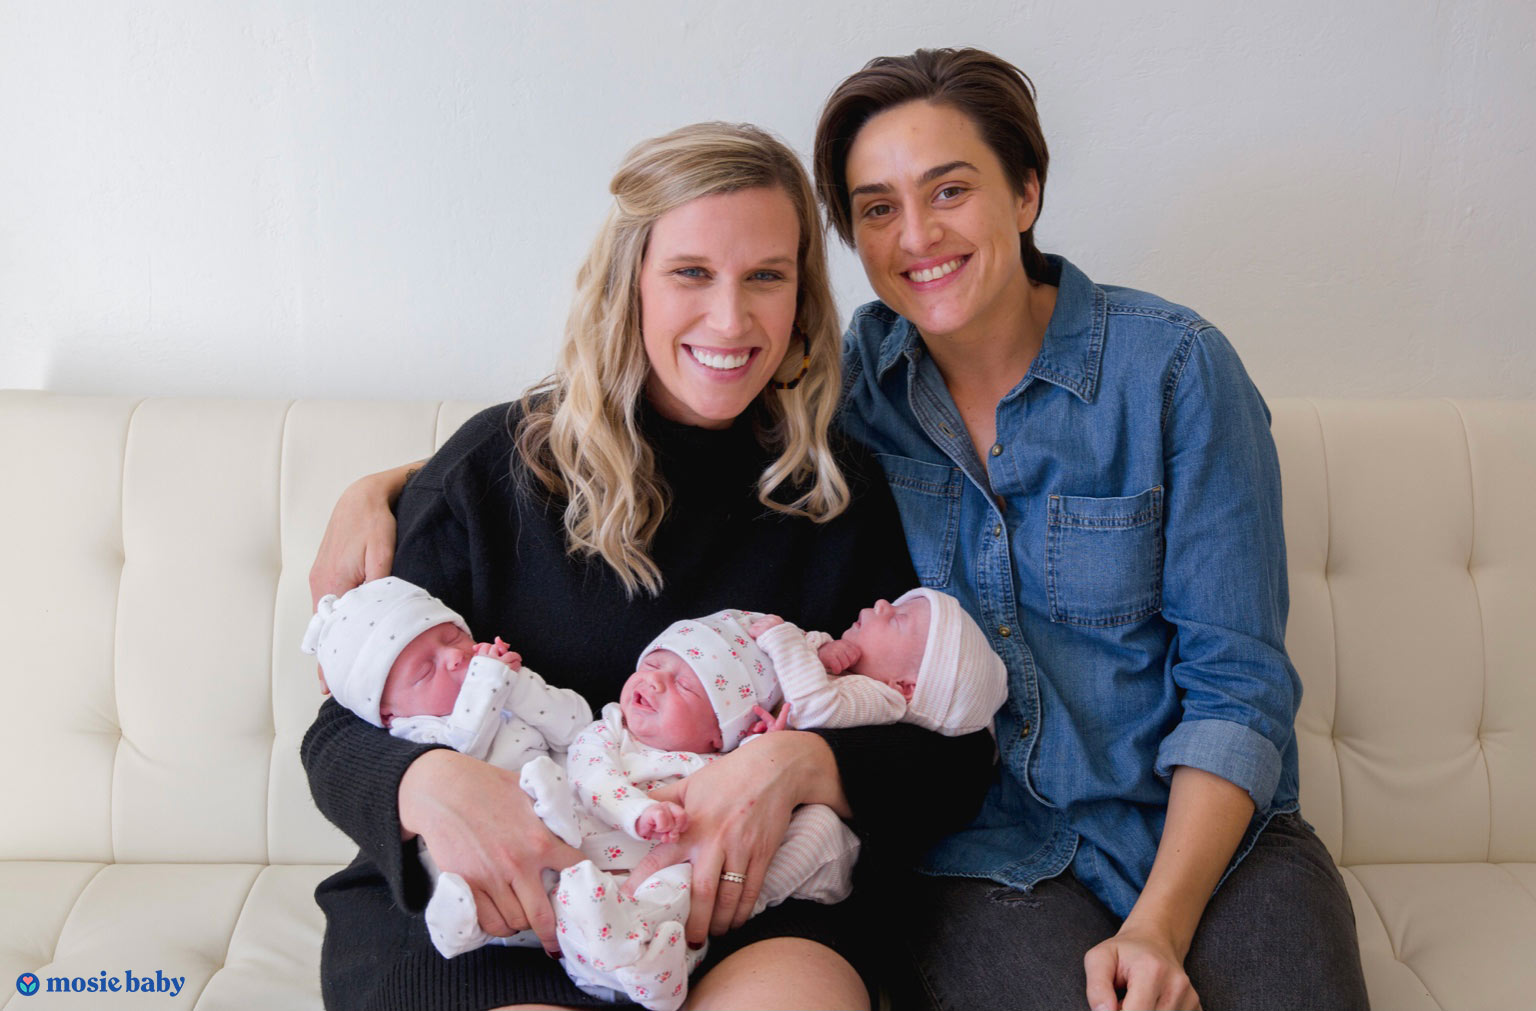 An LGBTQ couple sit on the couch holding triplets